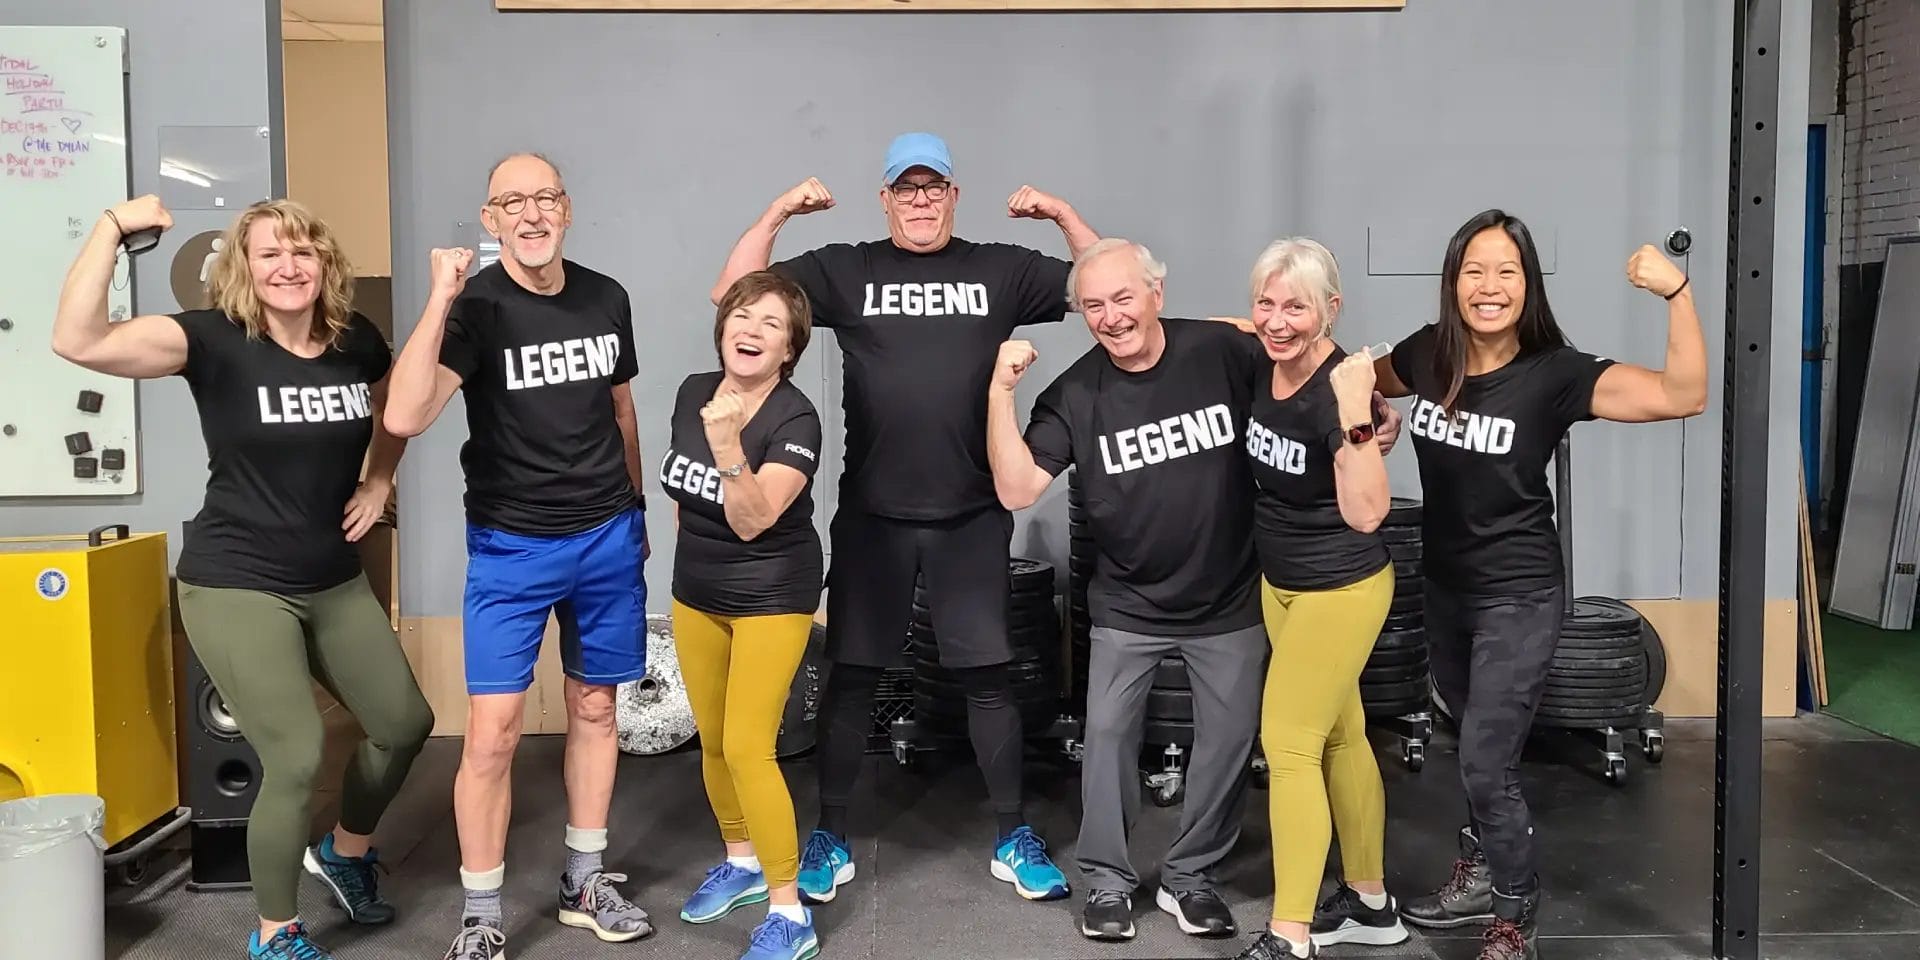 Legends posing for the gym photo